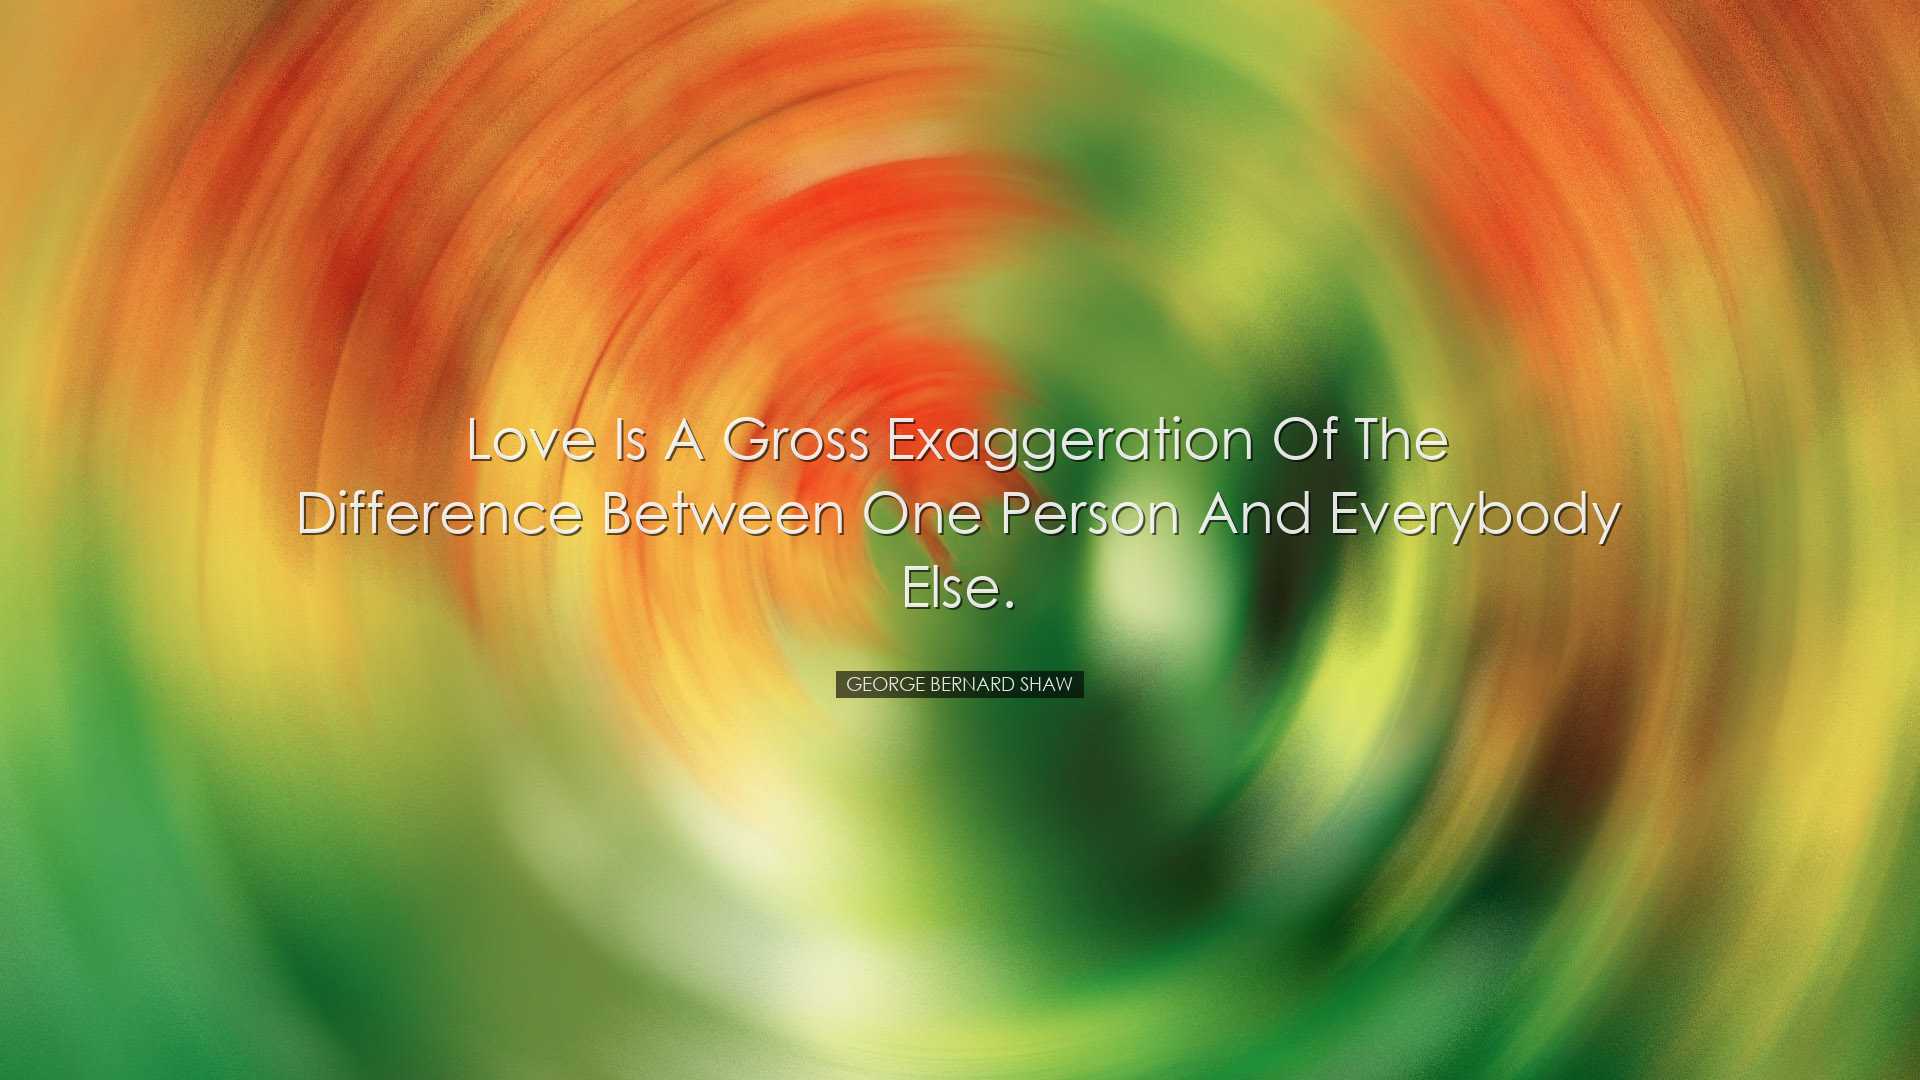 Love is a gross exaggeration of the difference between one person